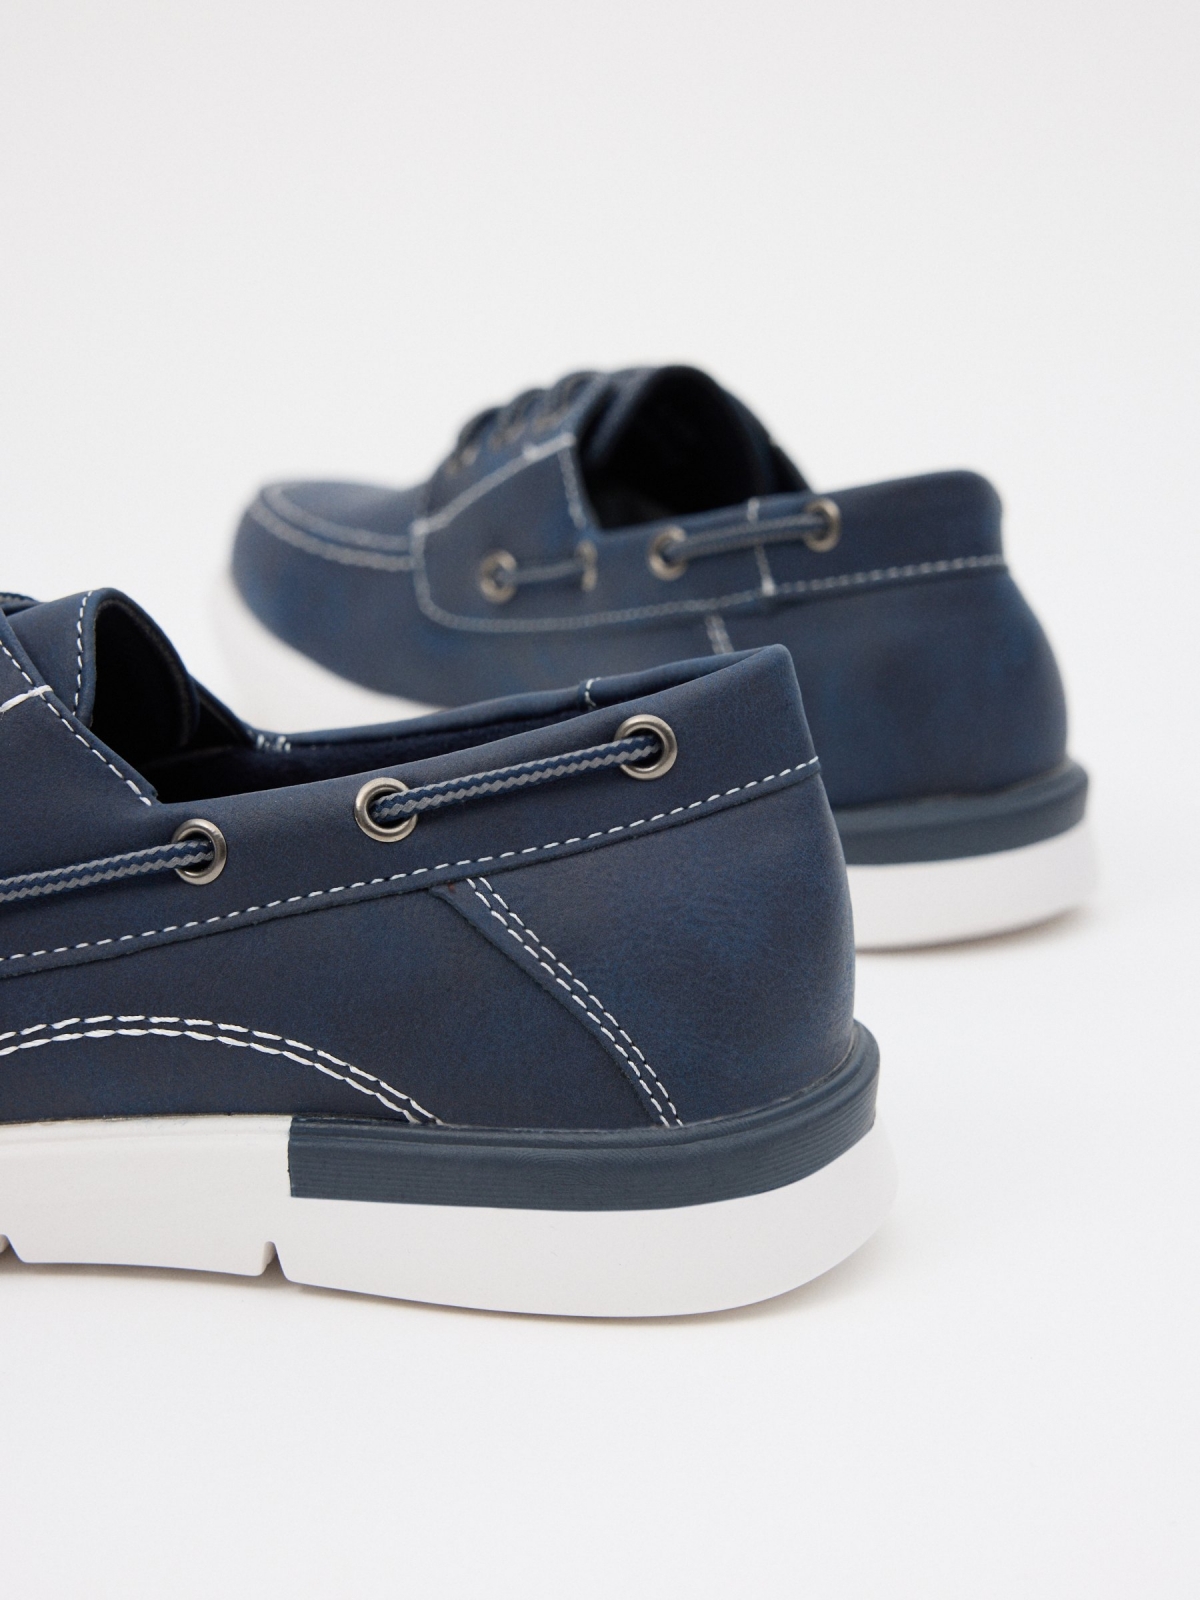 Combined nautical sport shoe navy detail view